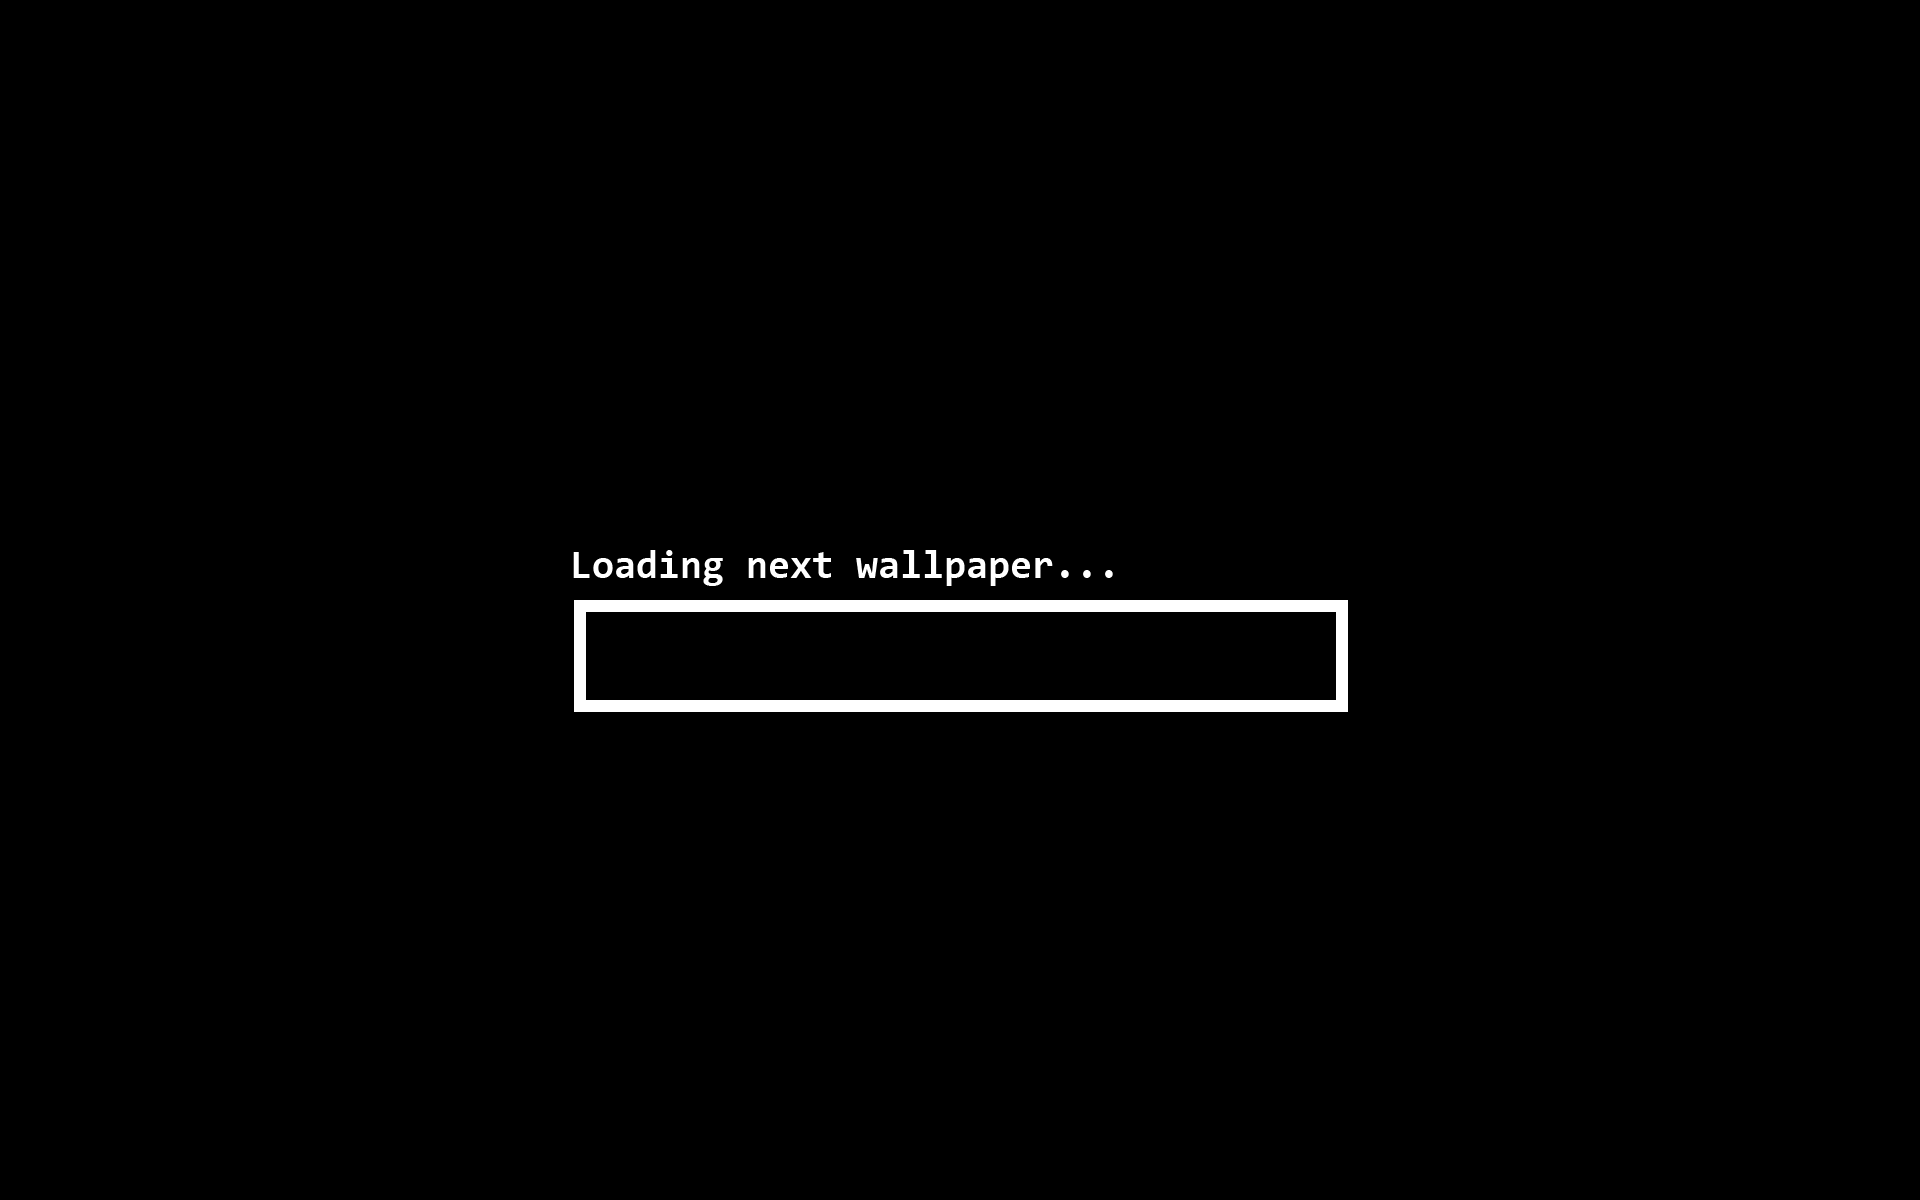  Loading Wallpaper 1m If You Can Use Animated Gifs For8230 1920x1200